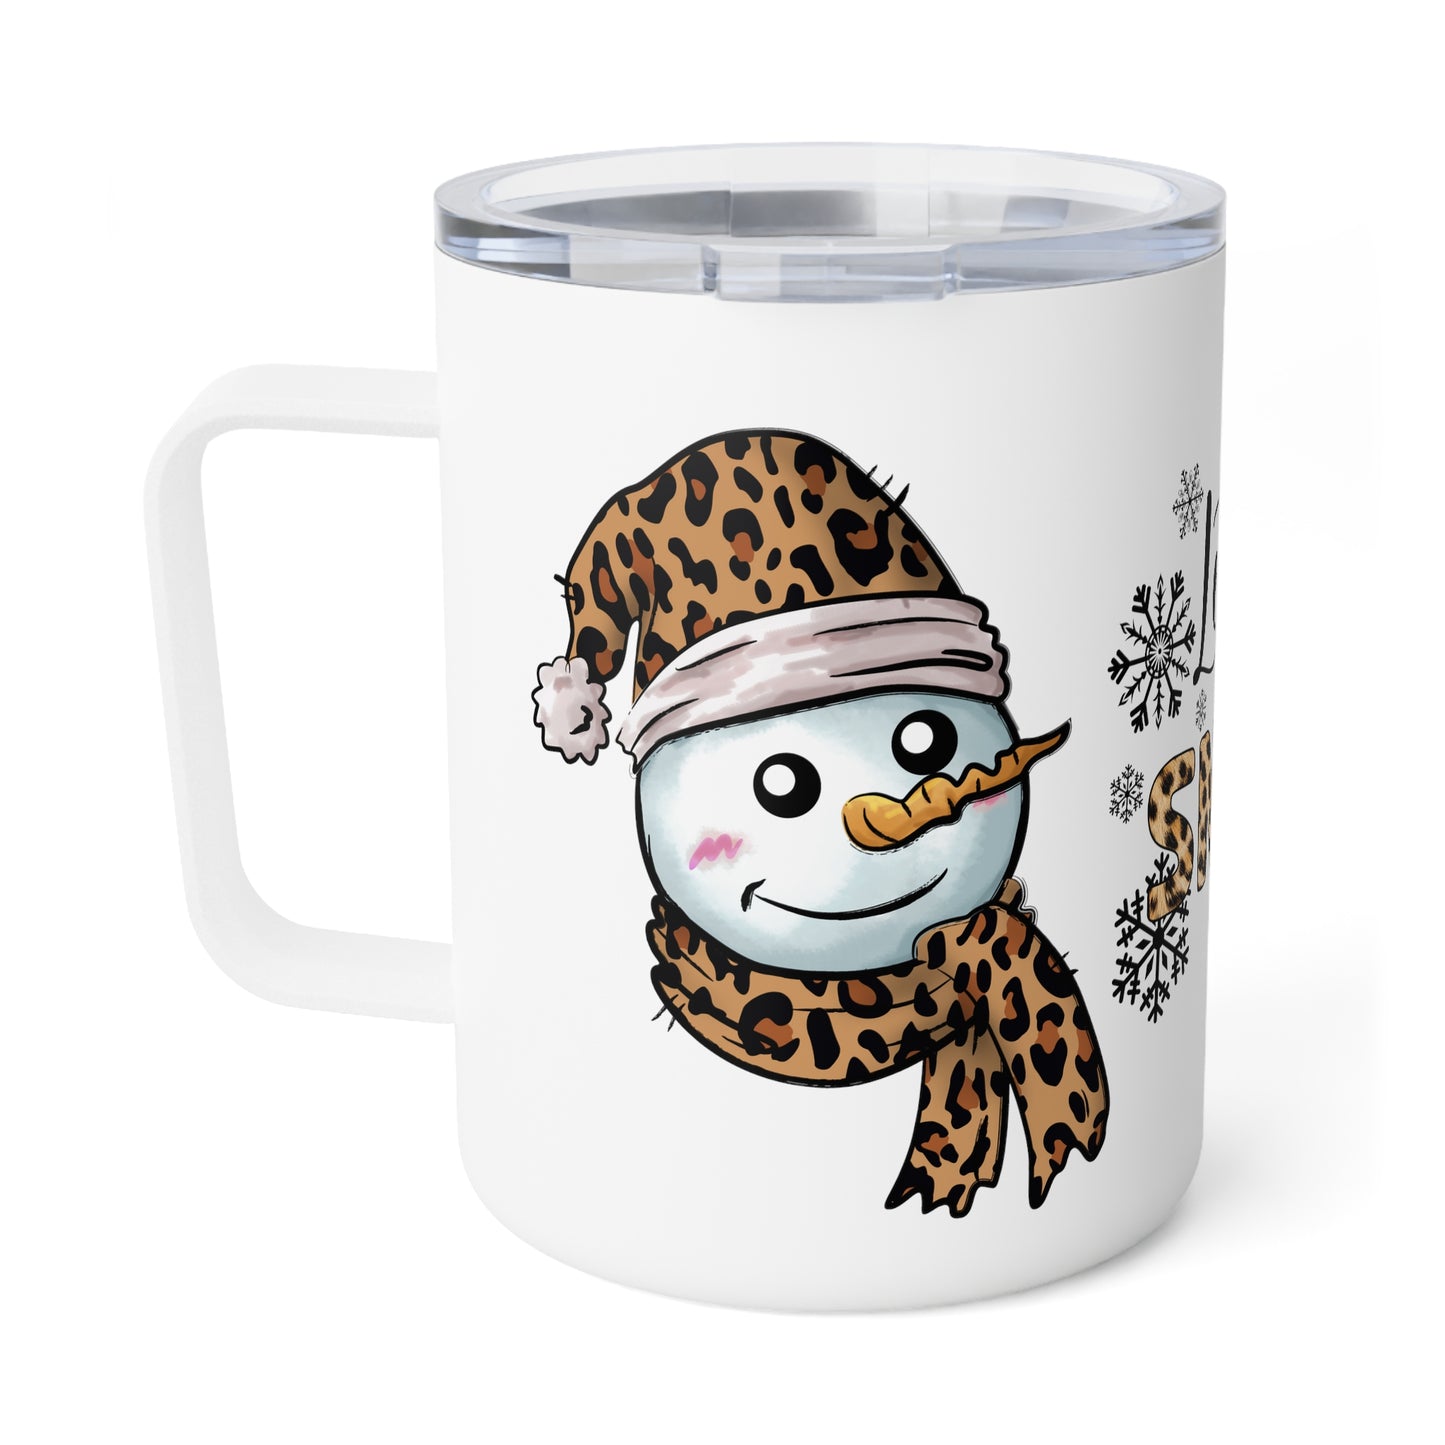 Leopard Snowman Let It Snow 10 oz. Stainless Steel Mug with Lid